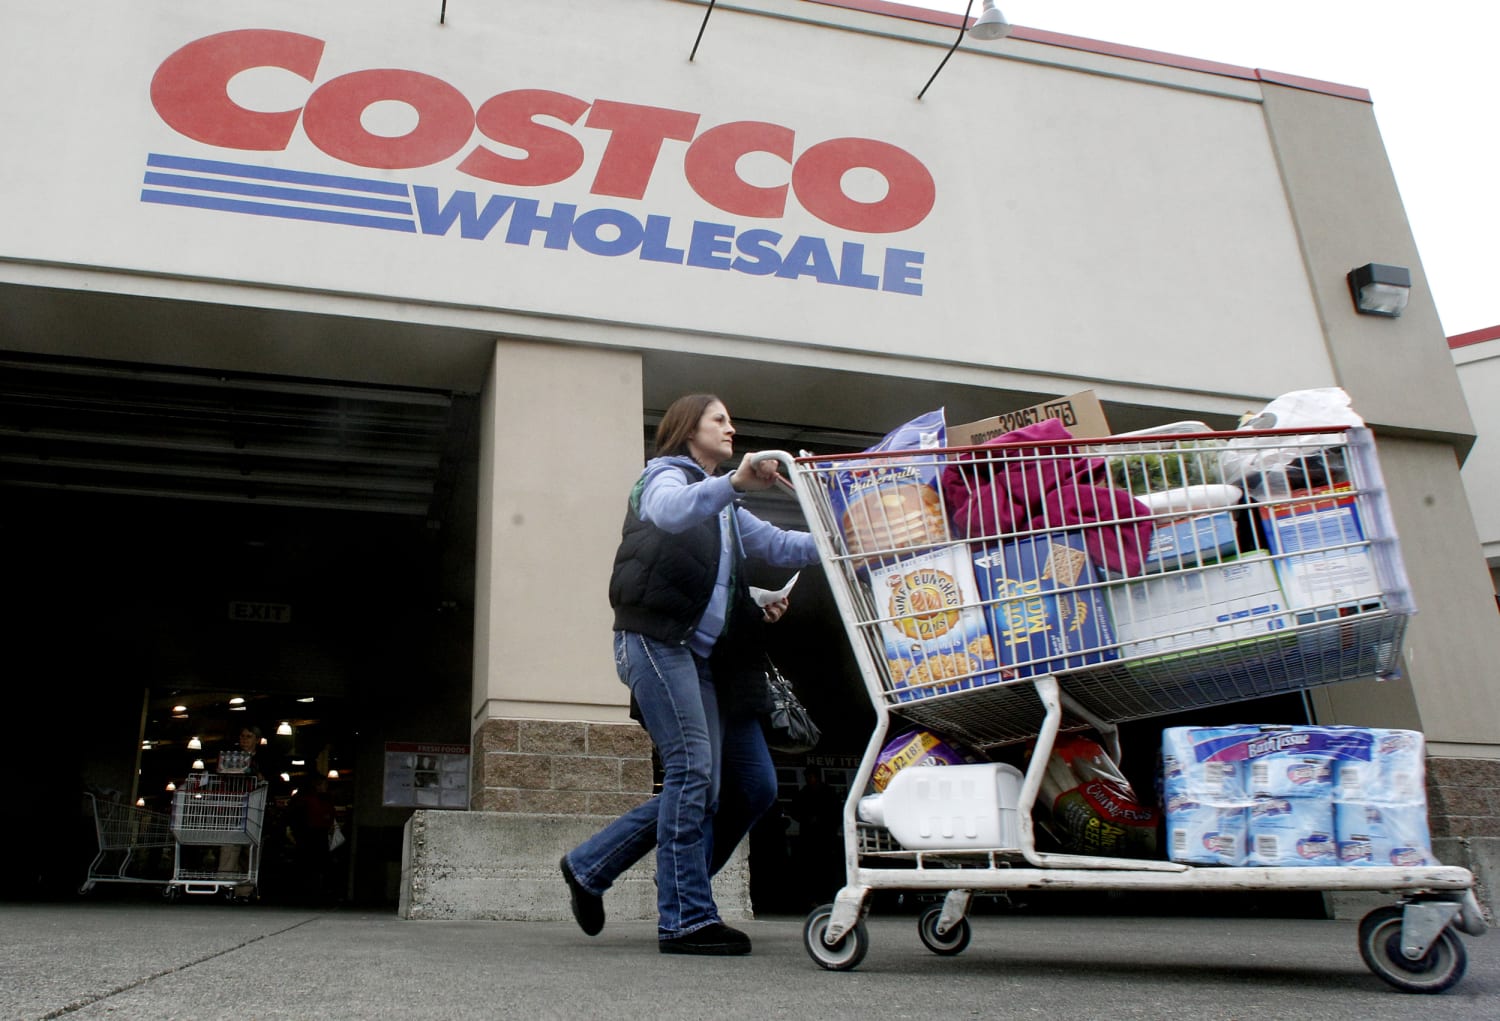 How to save money at Costco (and avoid overspending), according to